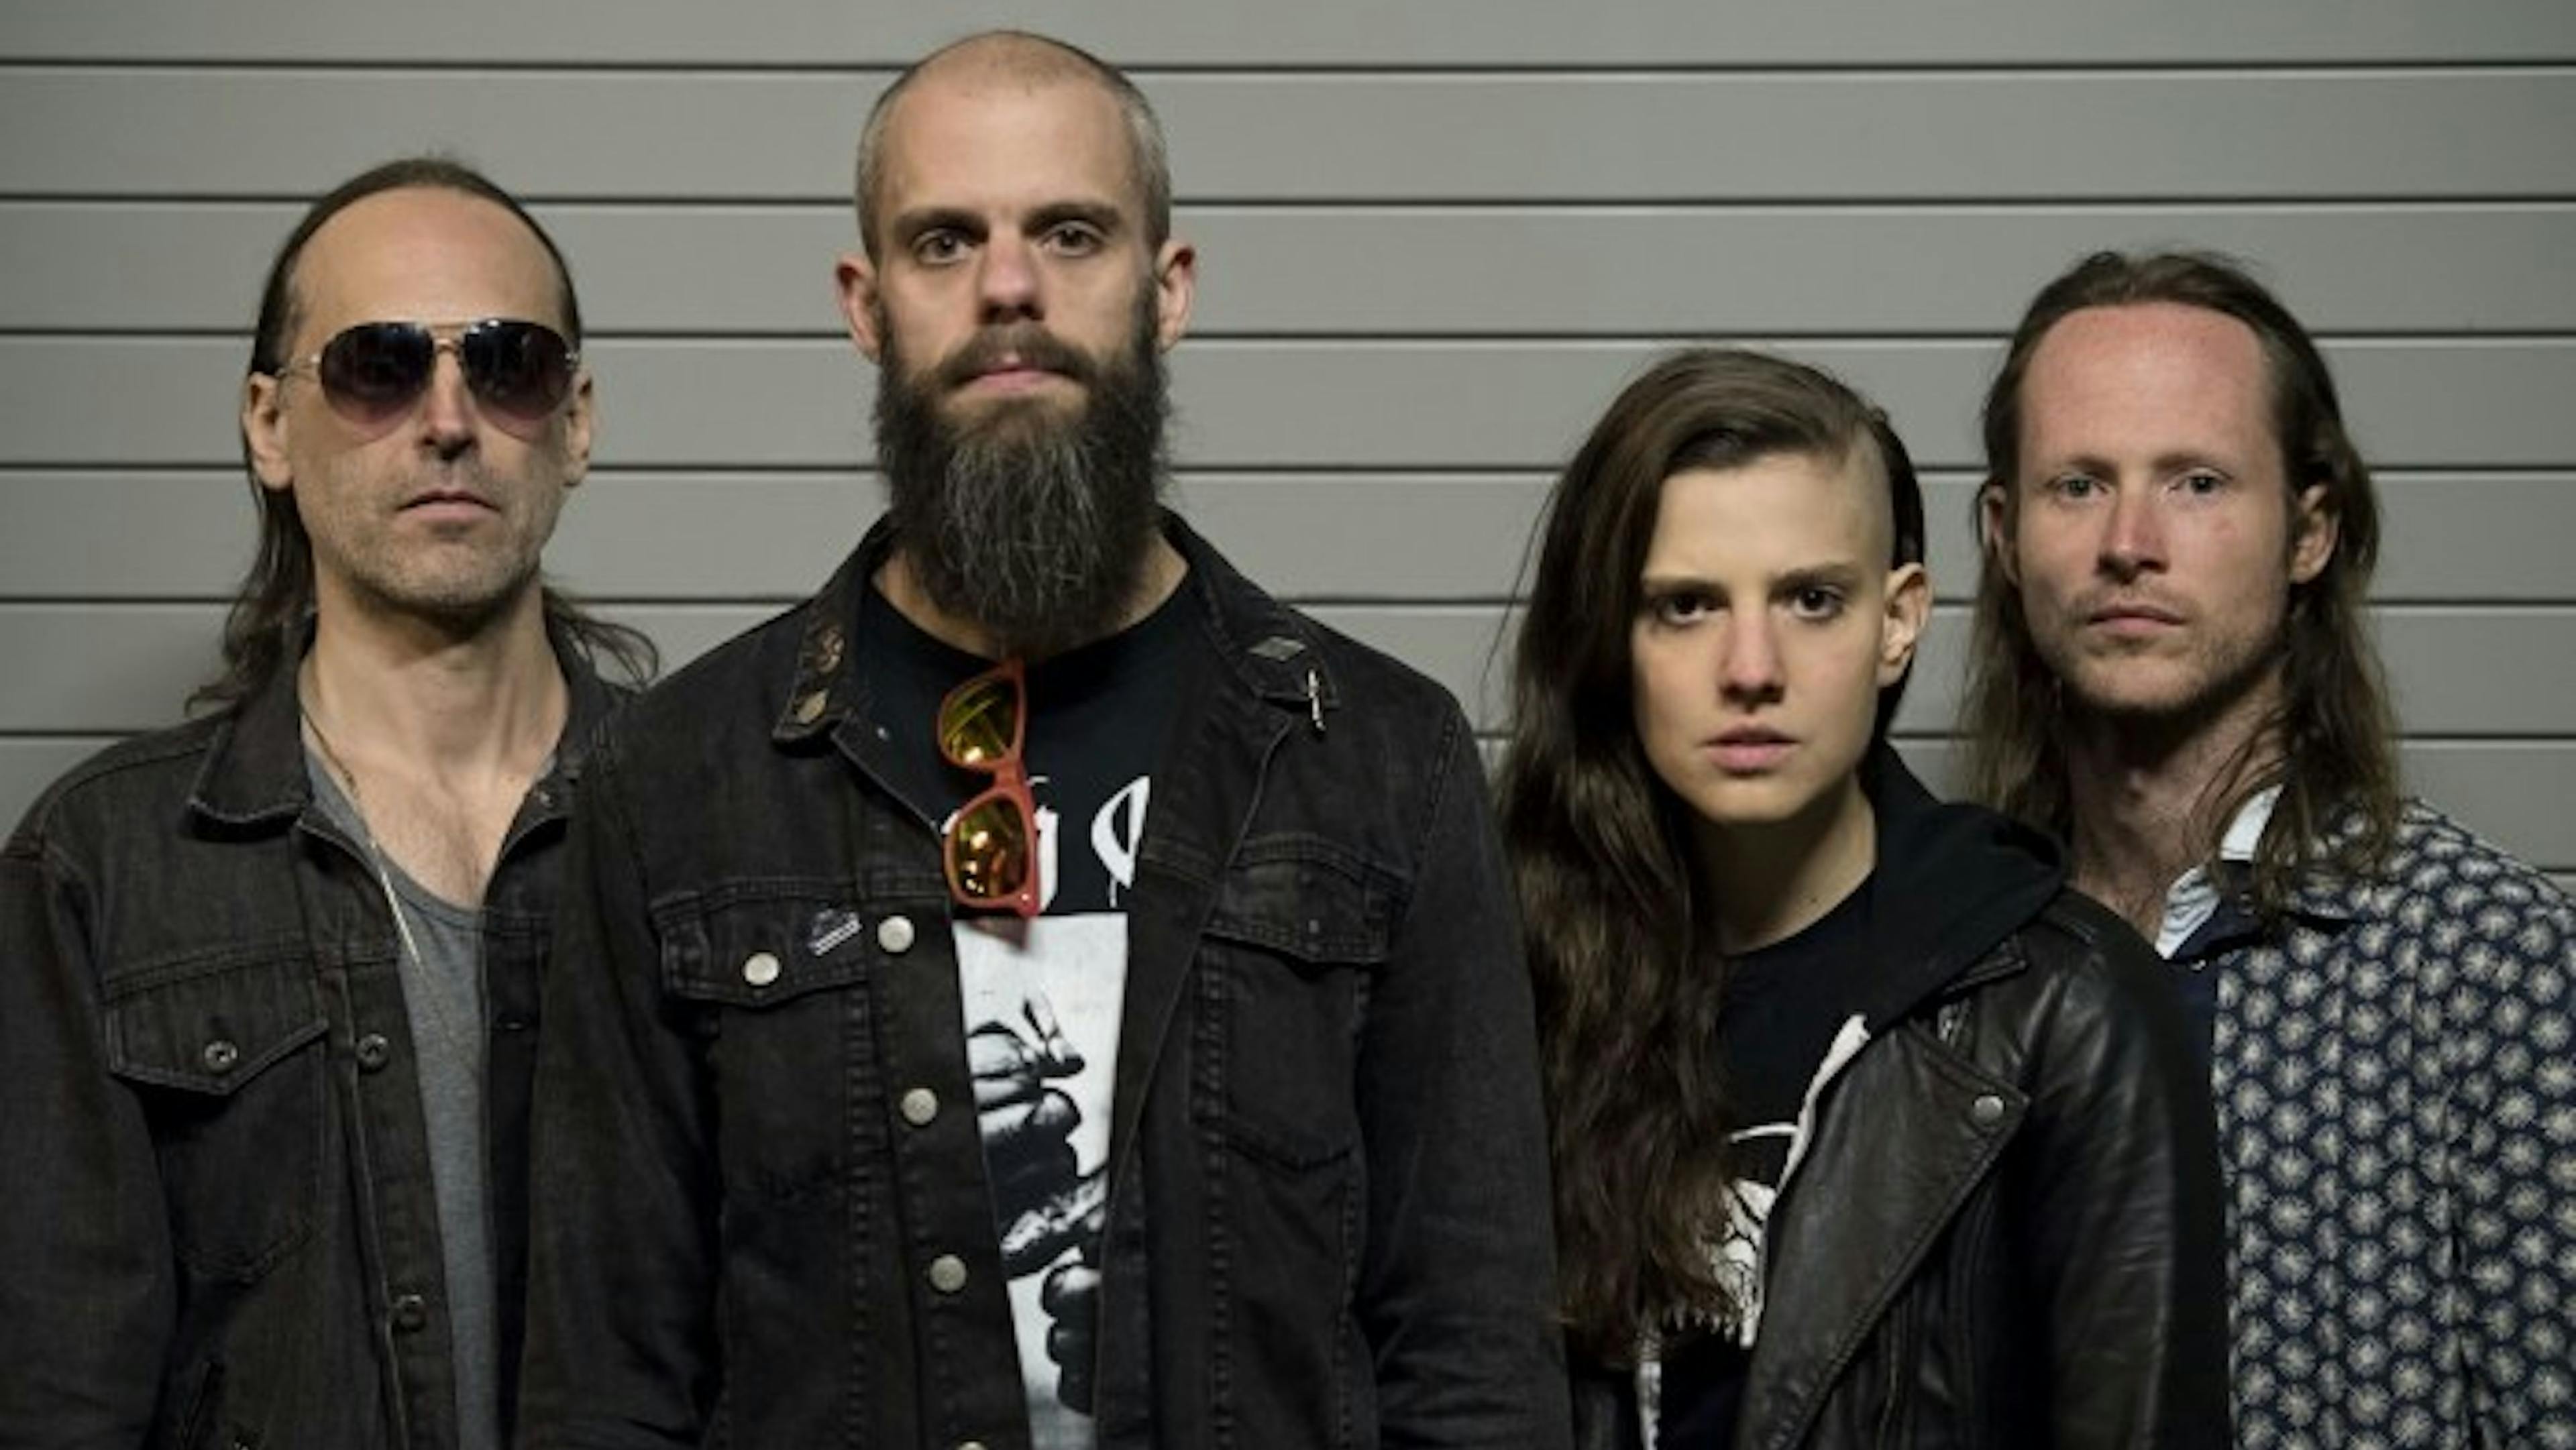 Baroness Announce U.S. Acoustic In-Store Dates